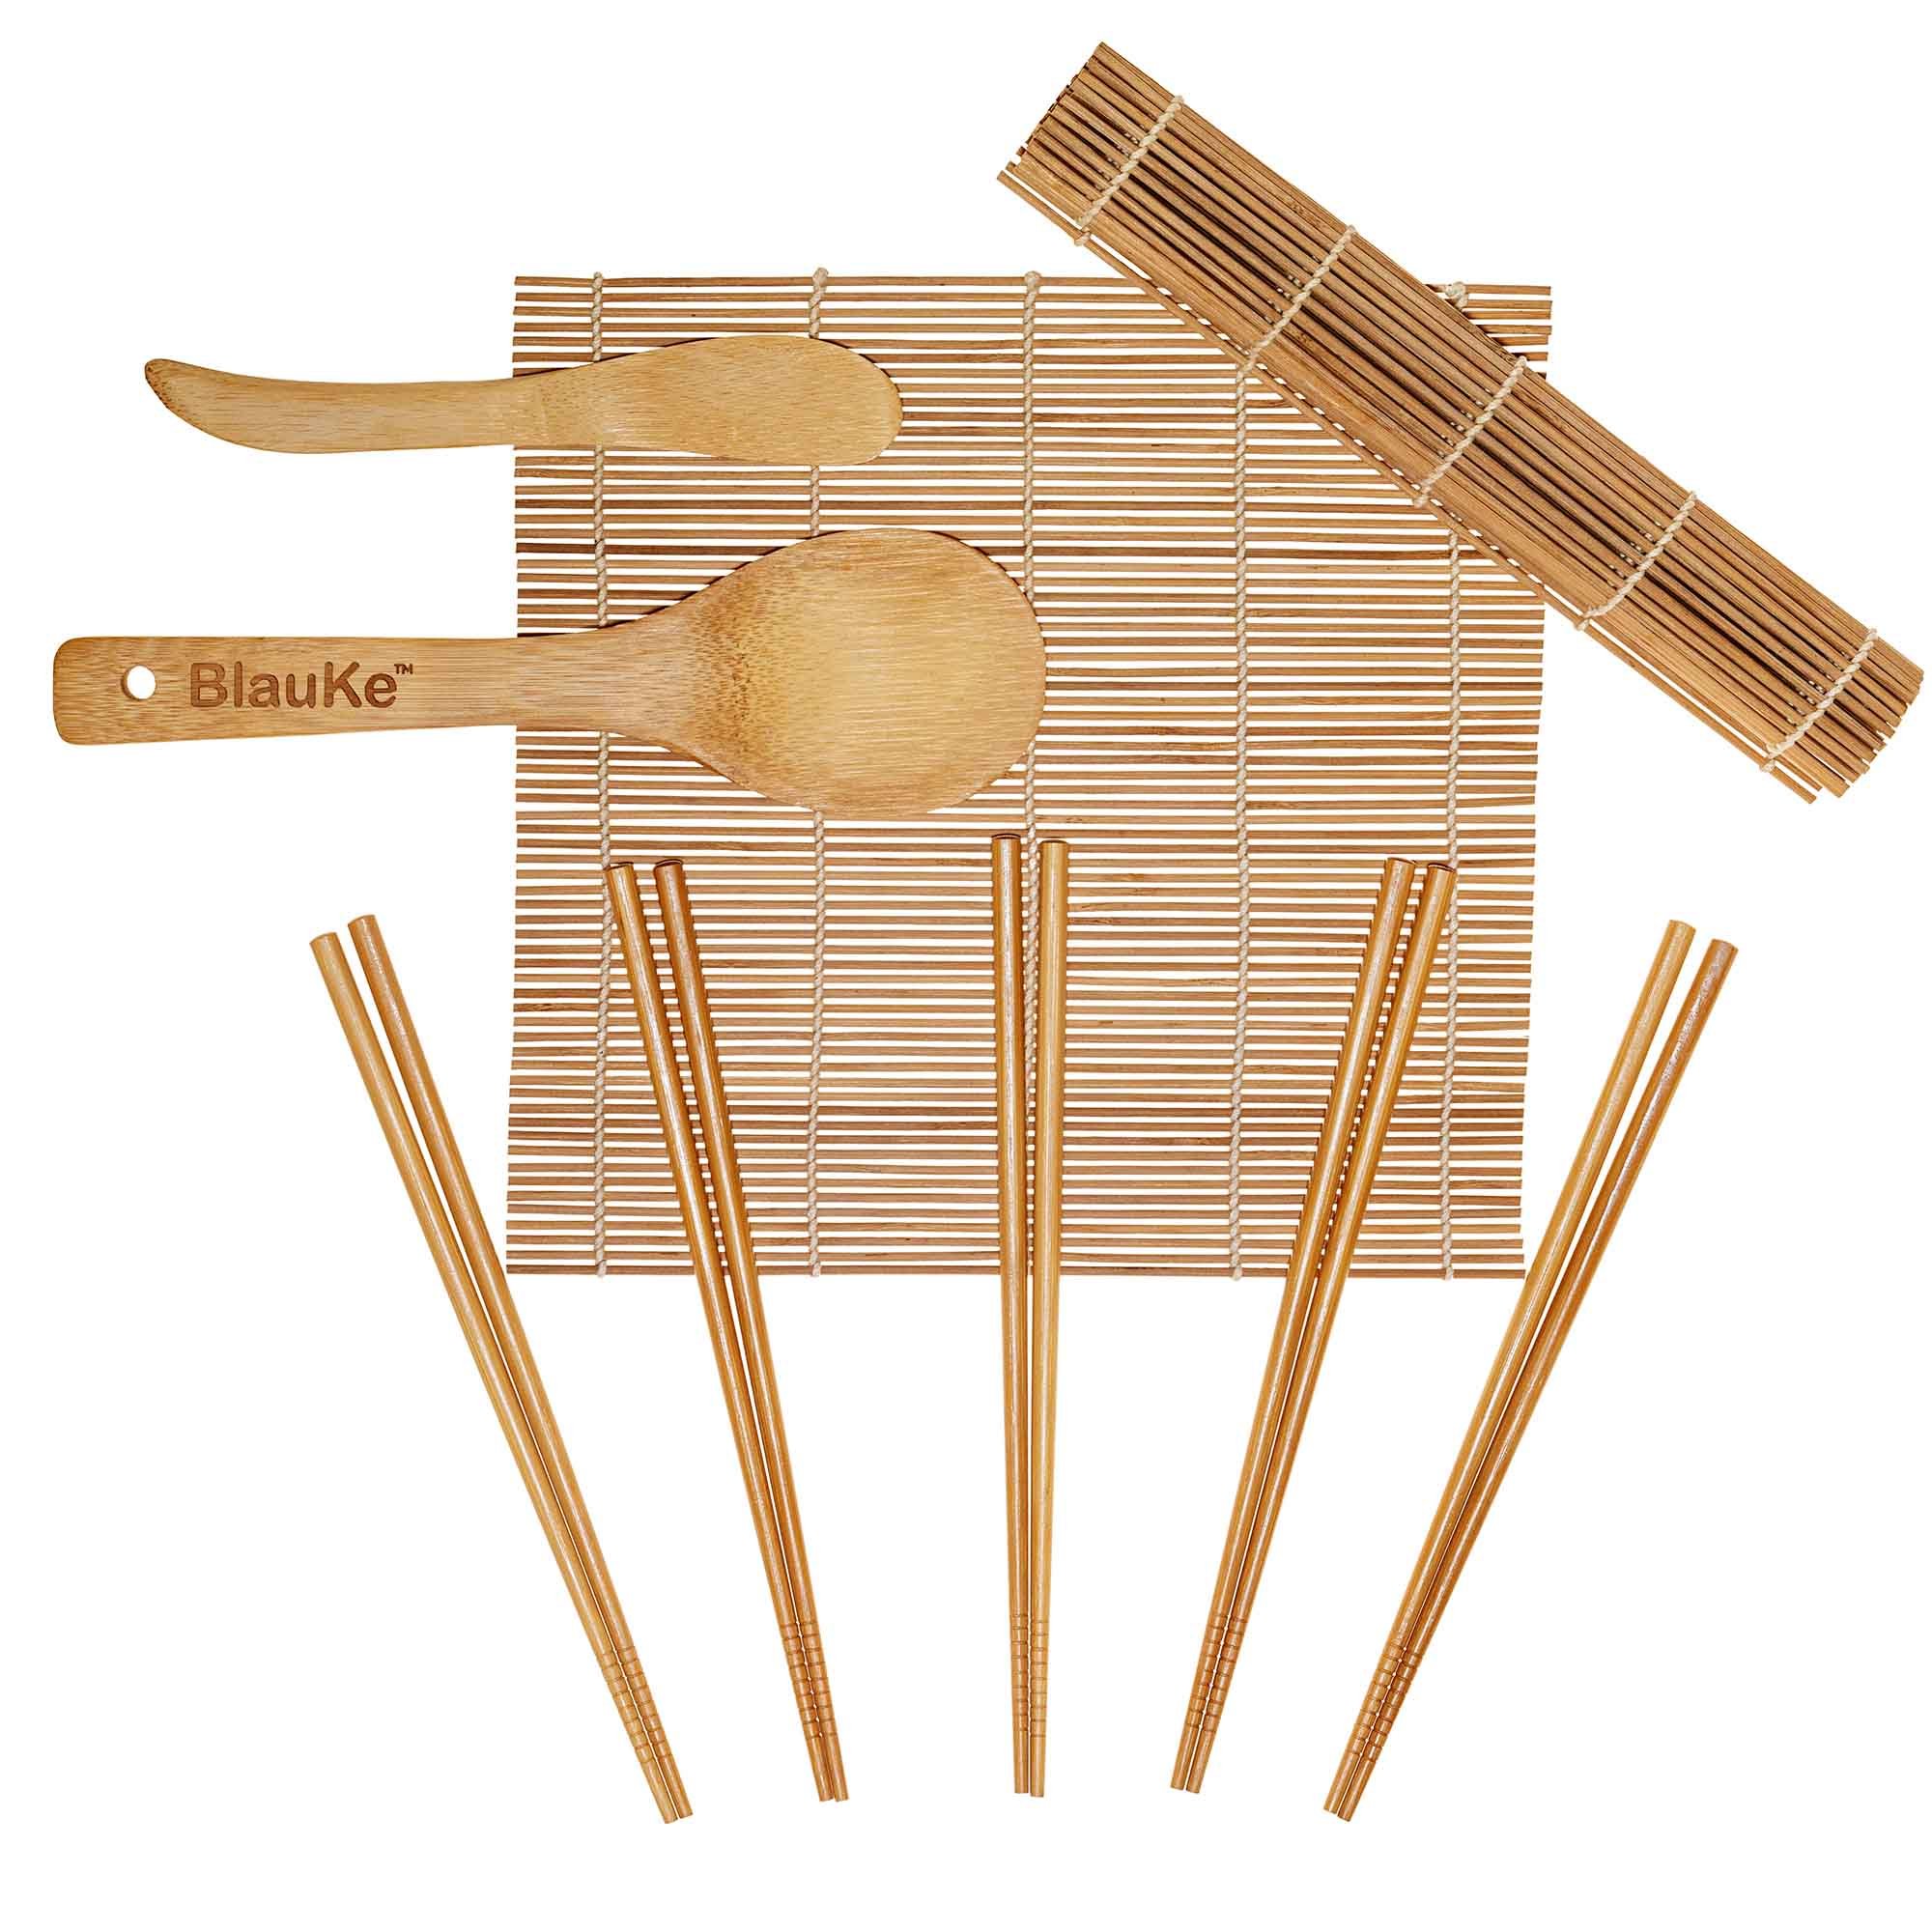 http://blauke.com/cdn/shop/products/Sushi_Making_Kit_Bamboo_Sushi_Mat_-_Includes_2_Bamboo_Sushi_Rolling_Mats_5_Pairs_Bamboo_Chopsticks_1_Rice_Paddle_and_1_Spreader_-_Beginner_Sushi_Kit_with_Bamboo_Rolling_Mats_and_Utens_cf050bfd-1f4a-4b2c-bee9-ebf45916a93c.jpg?v=1595608000